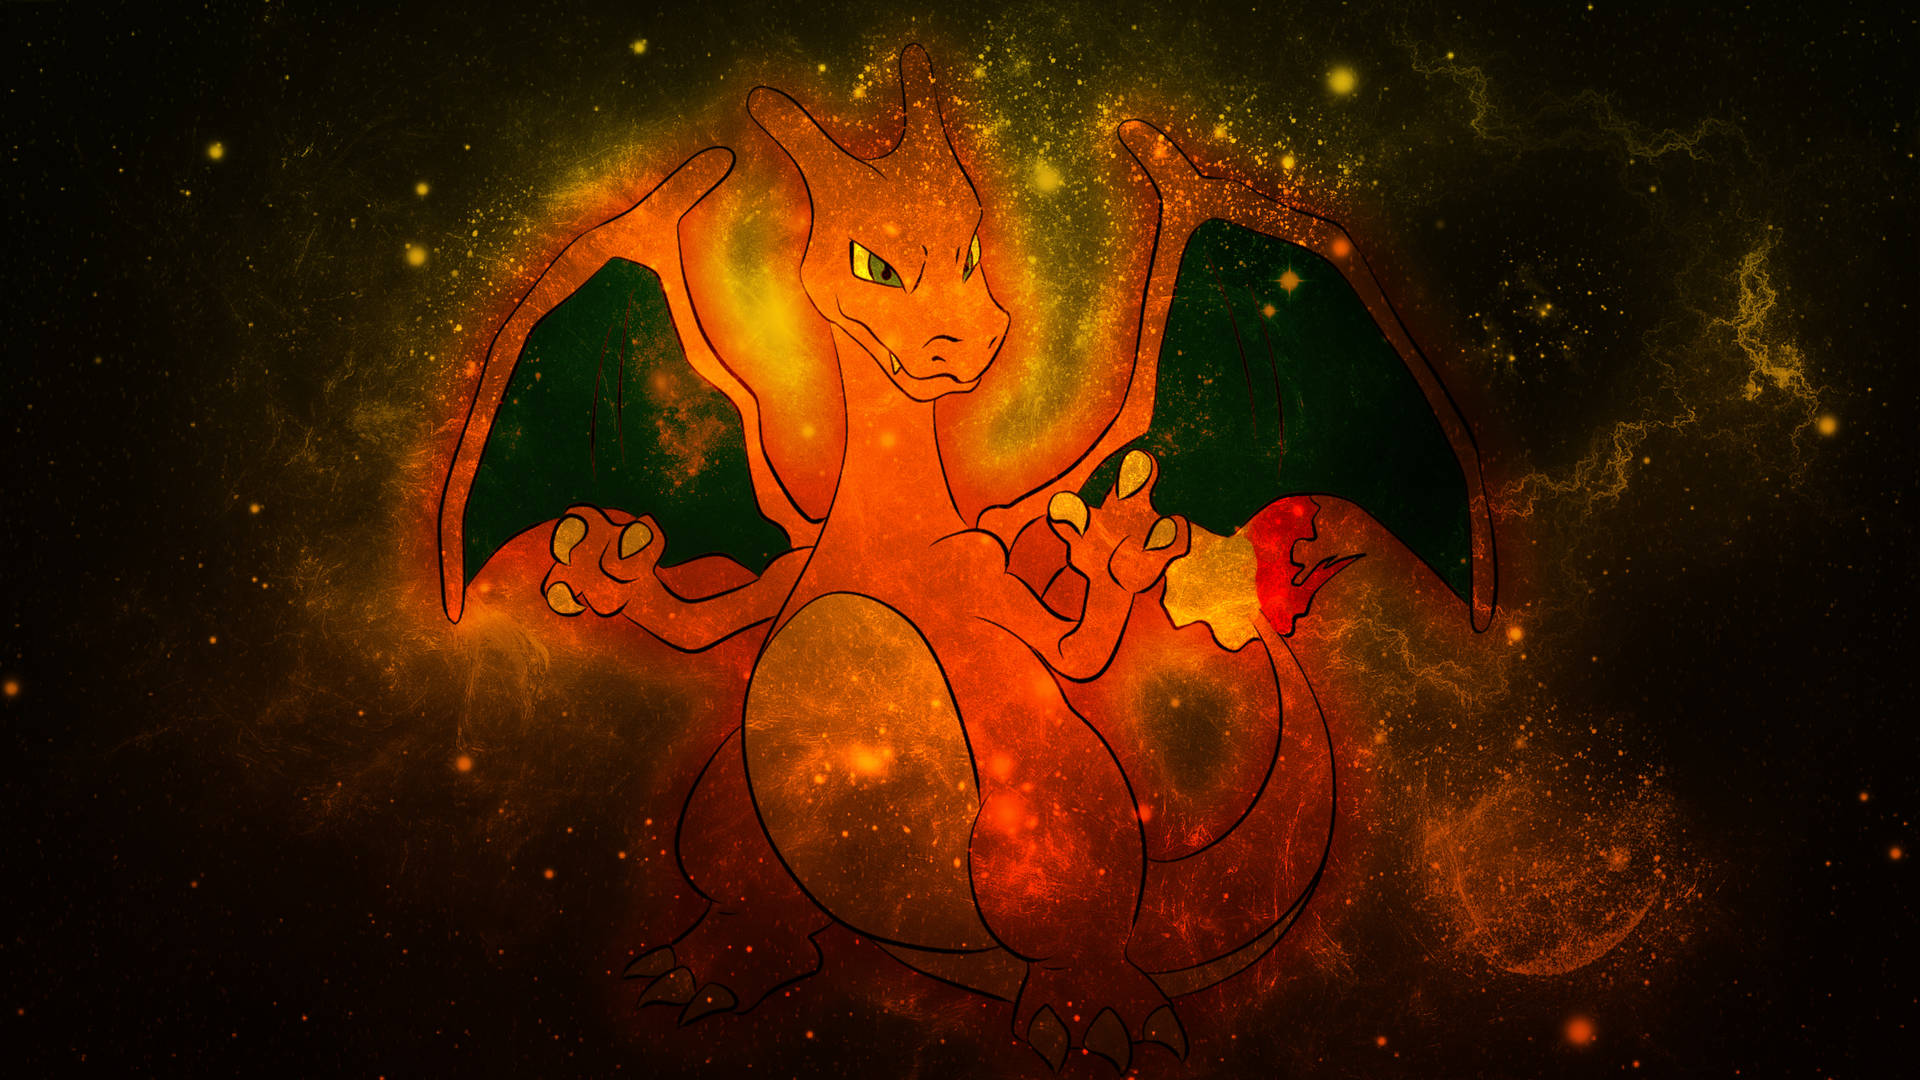 Feel The Magic Of Charizard In This Translucent Galaxy Background